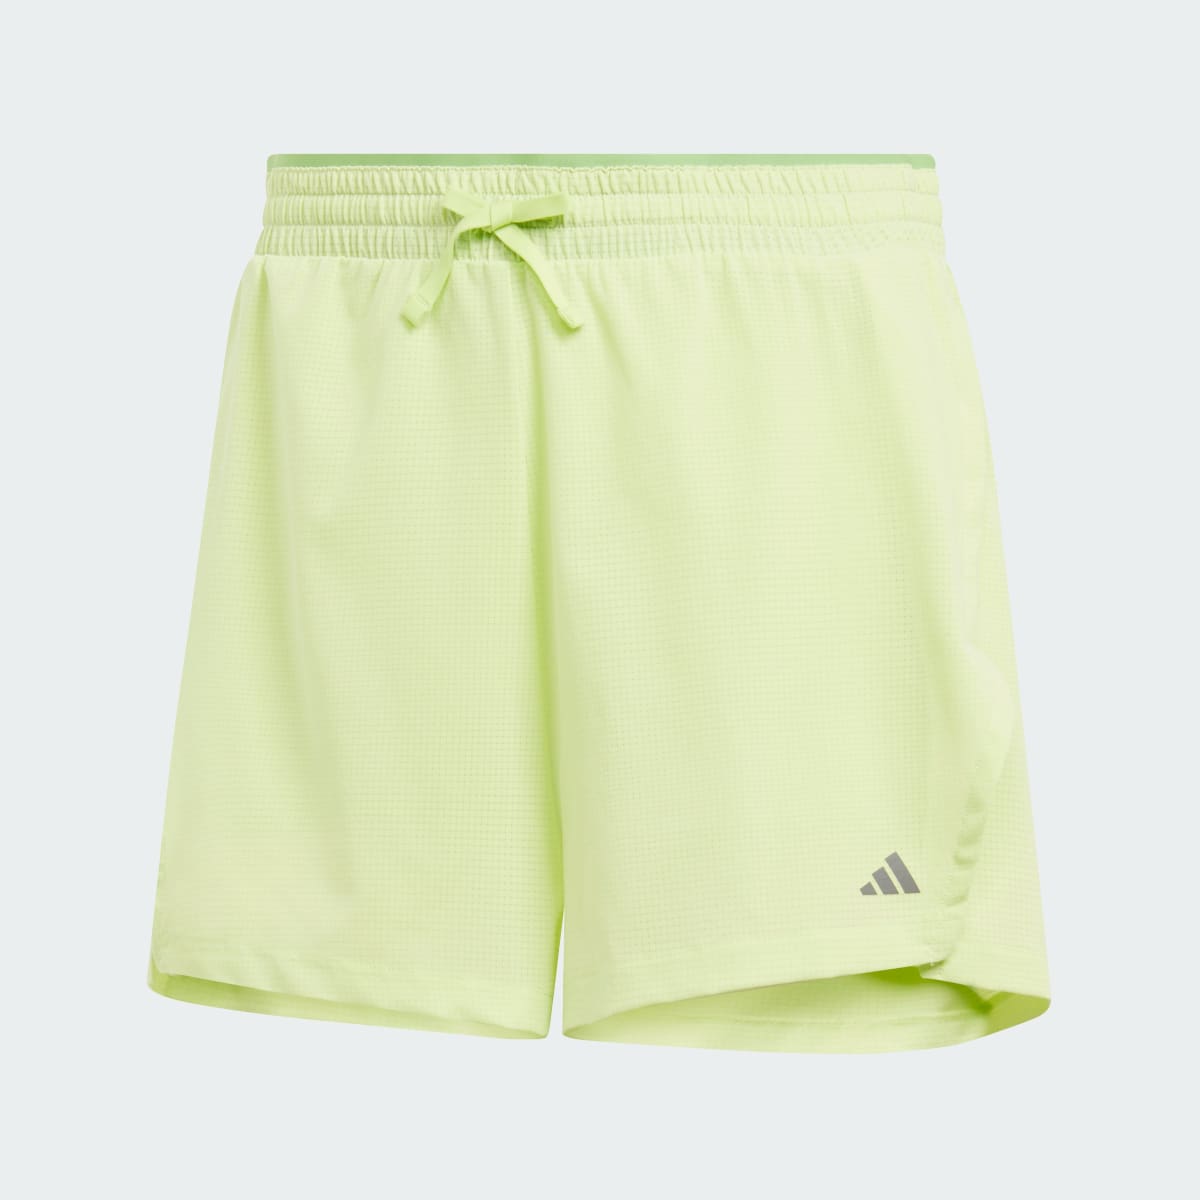 Adidas Shorts HIIT HEAT.RDY Two-in-One. 4